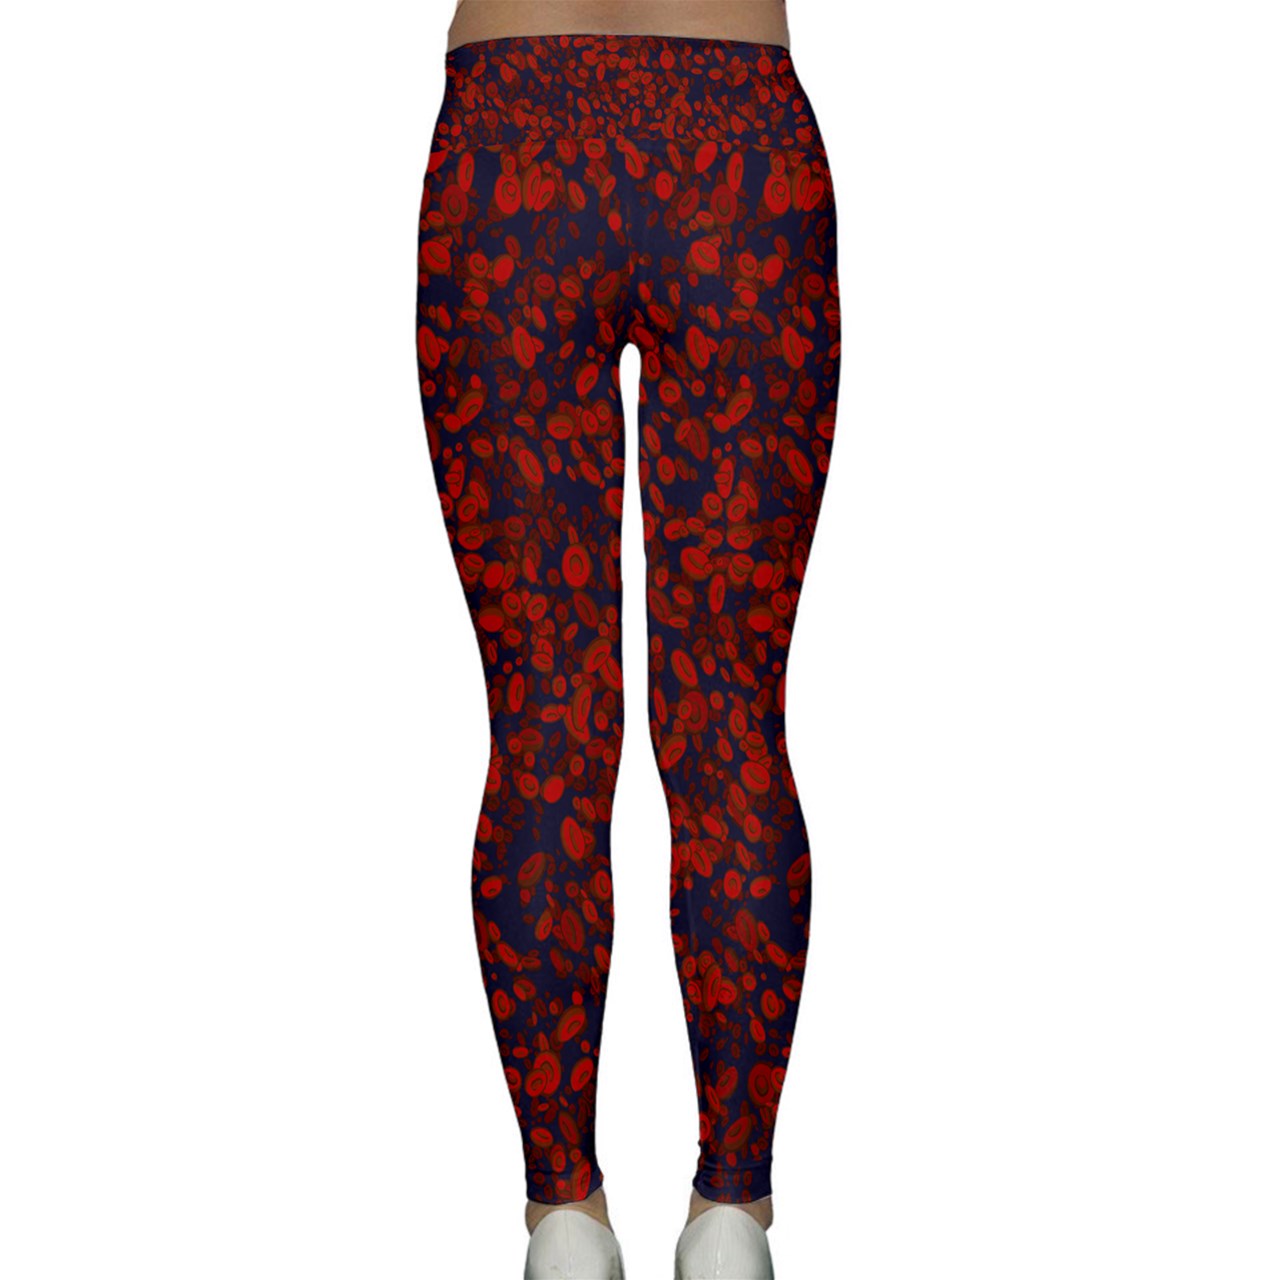 Red Blood Cell Classic Yoga Leggings